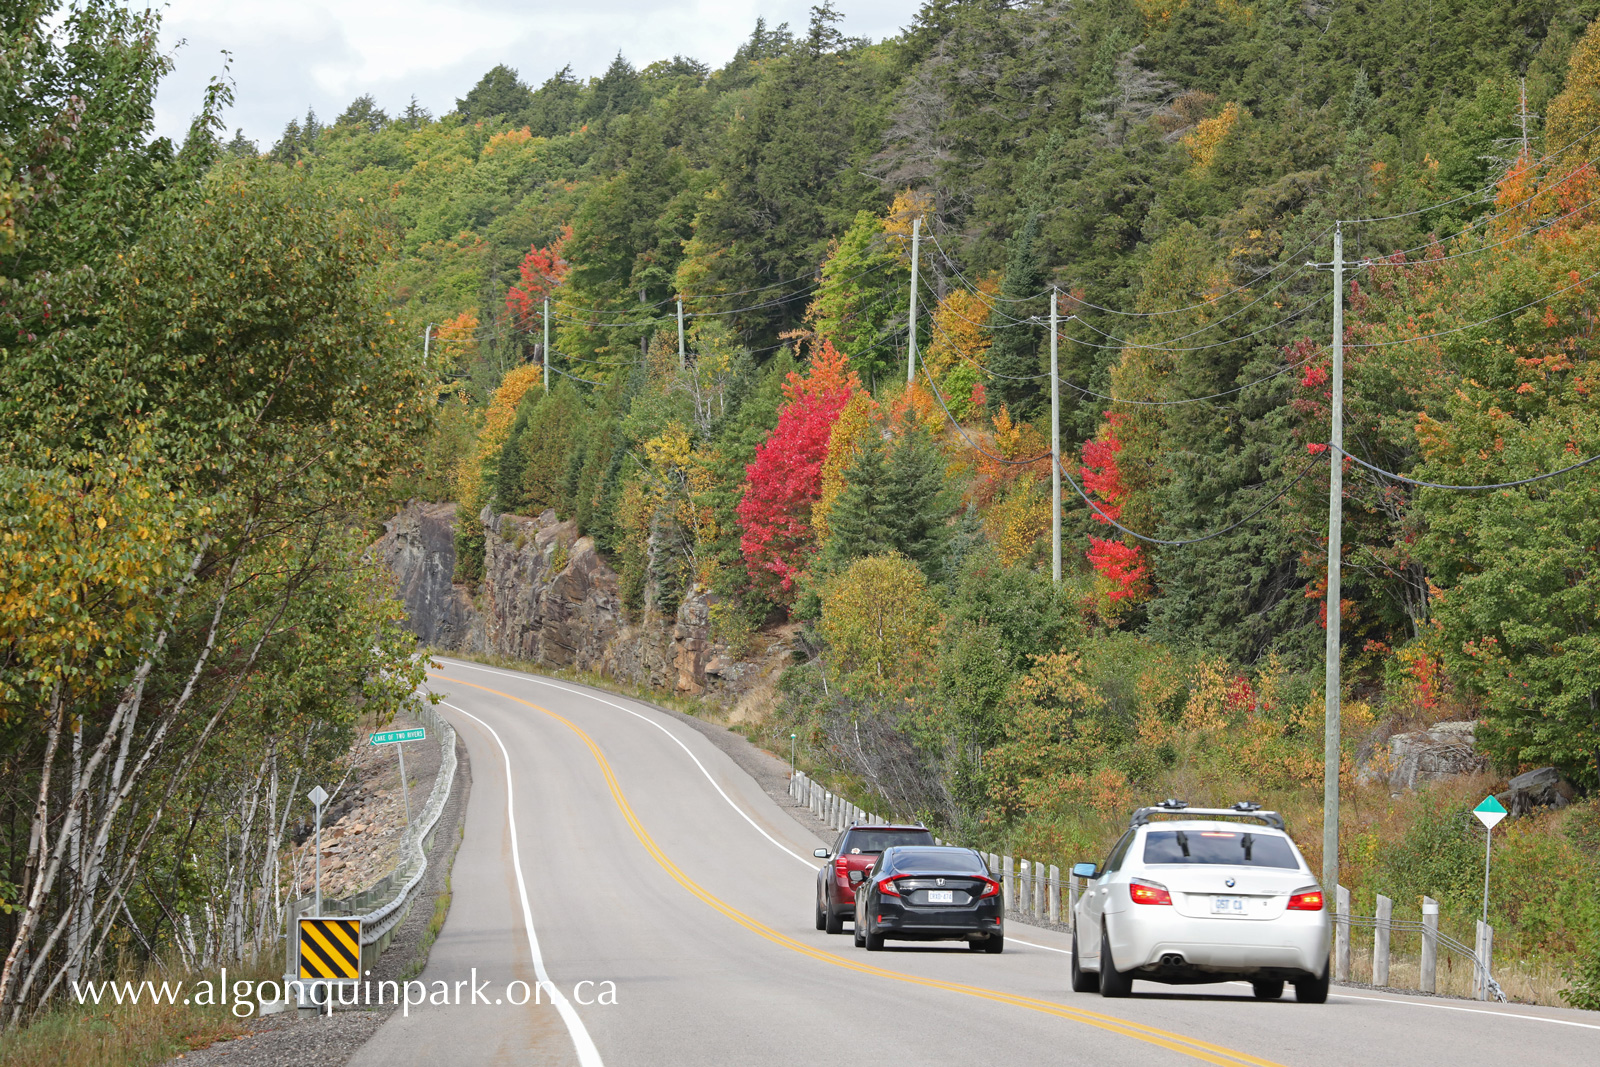 Highway 60 near Lake of Two Rivers in Algonquin Park on September 12, 2022 